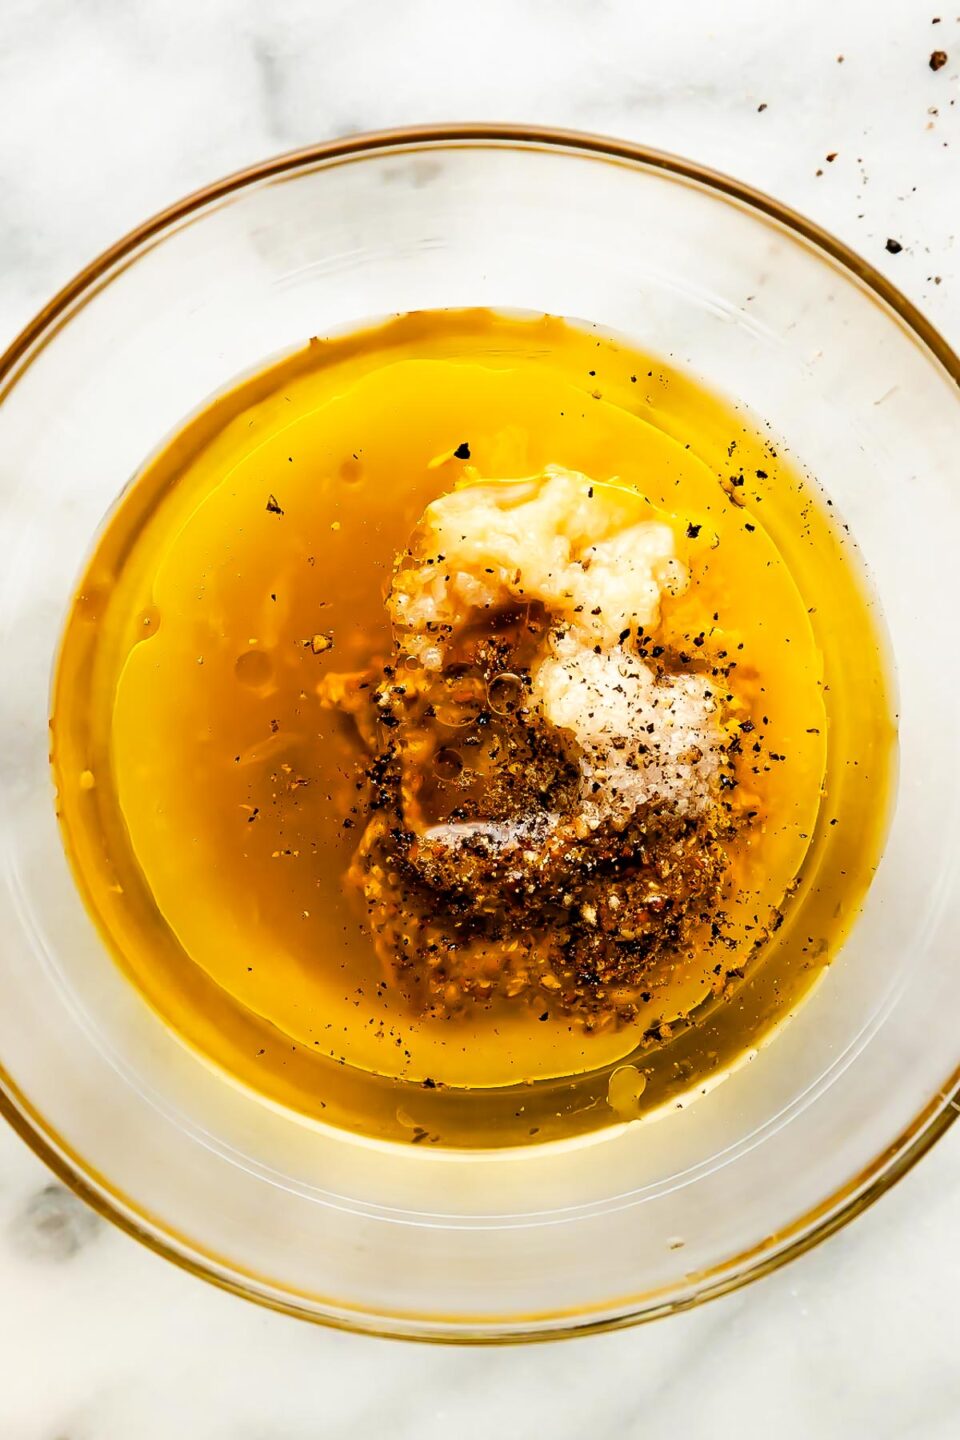 An overhead shot of ingredients in a small glass bowl: whole grain mustard, lemon juice, apple cider vinegar, maple syrup, black pepper, and garlic.